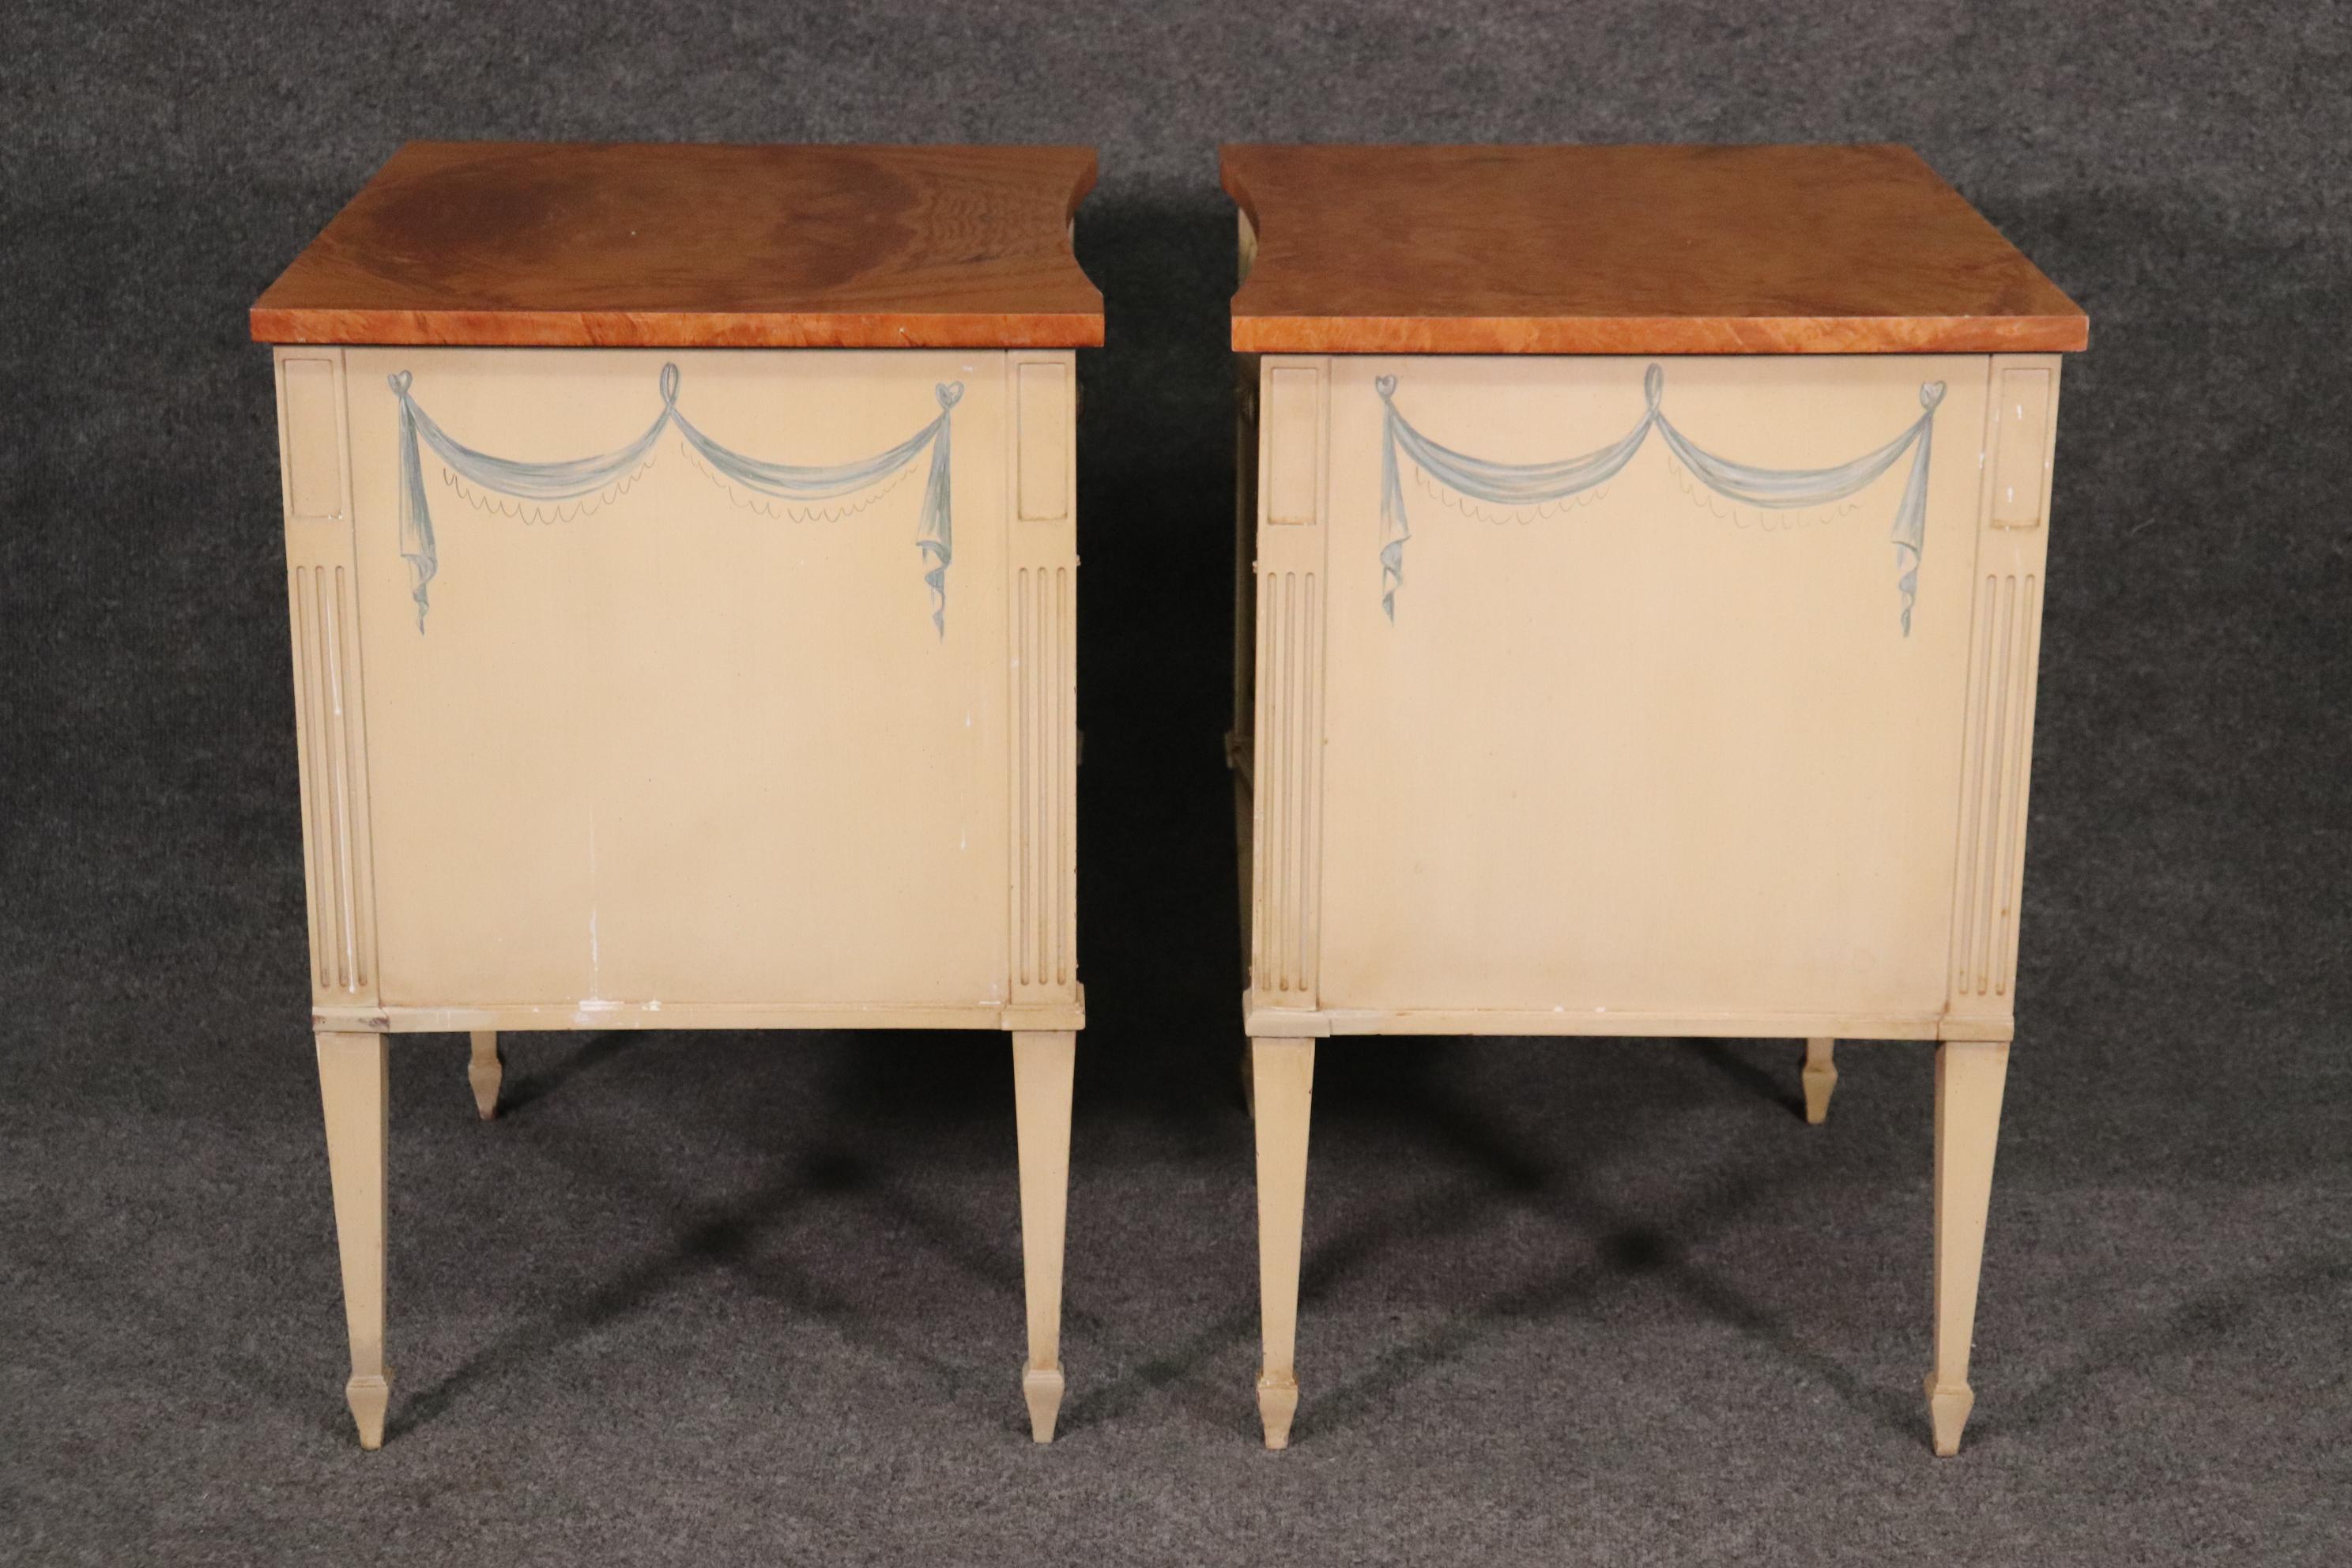 American Pair Paint Decorated Burled Walnut Adams Style Schmieg and Kotzian Night Stands